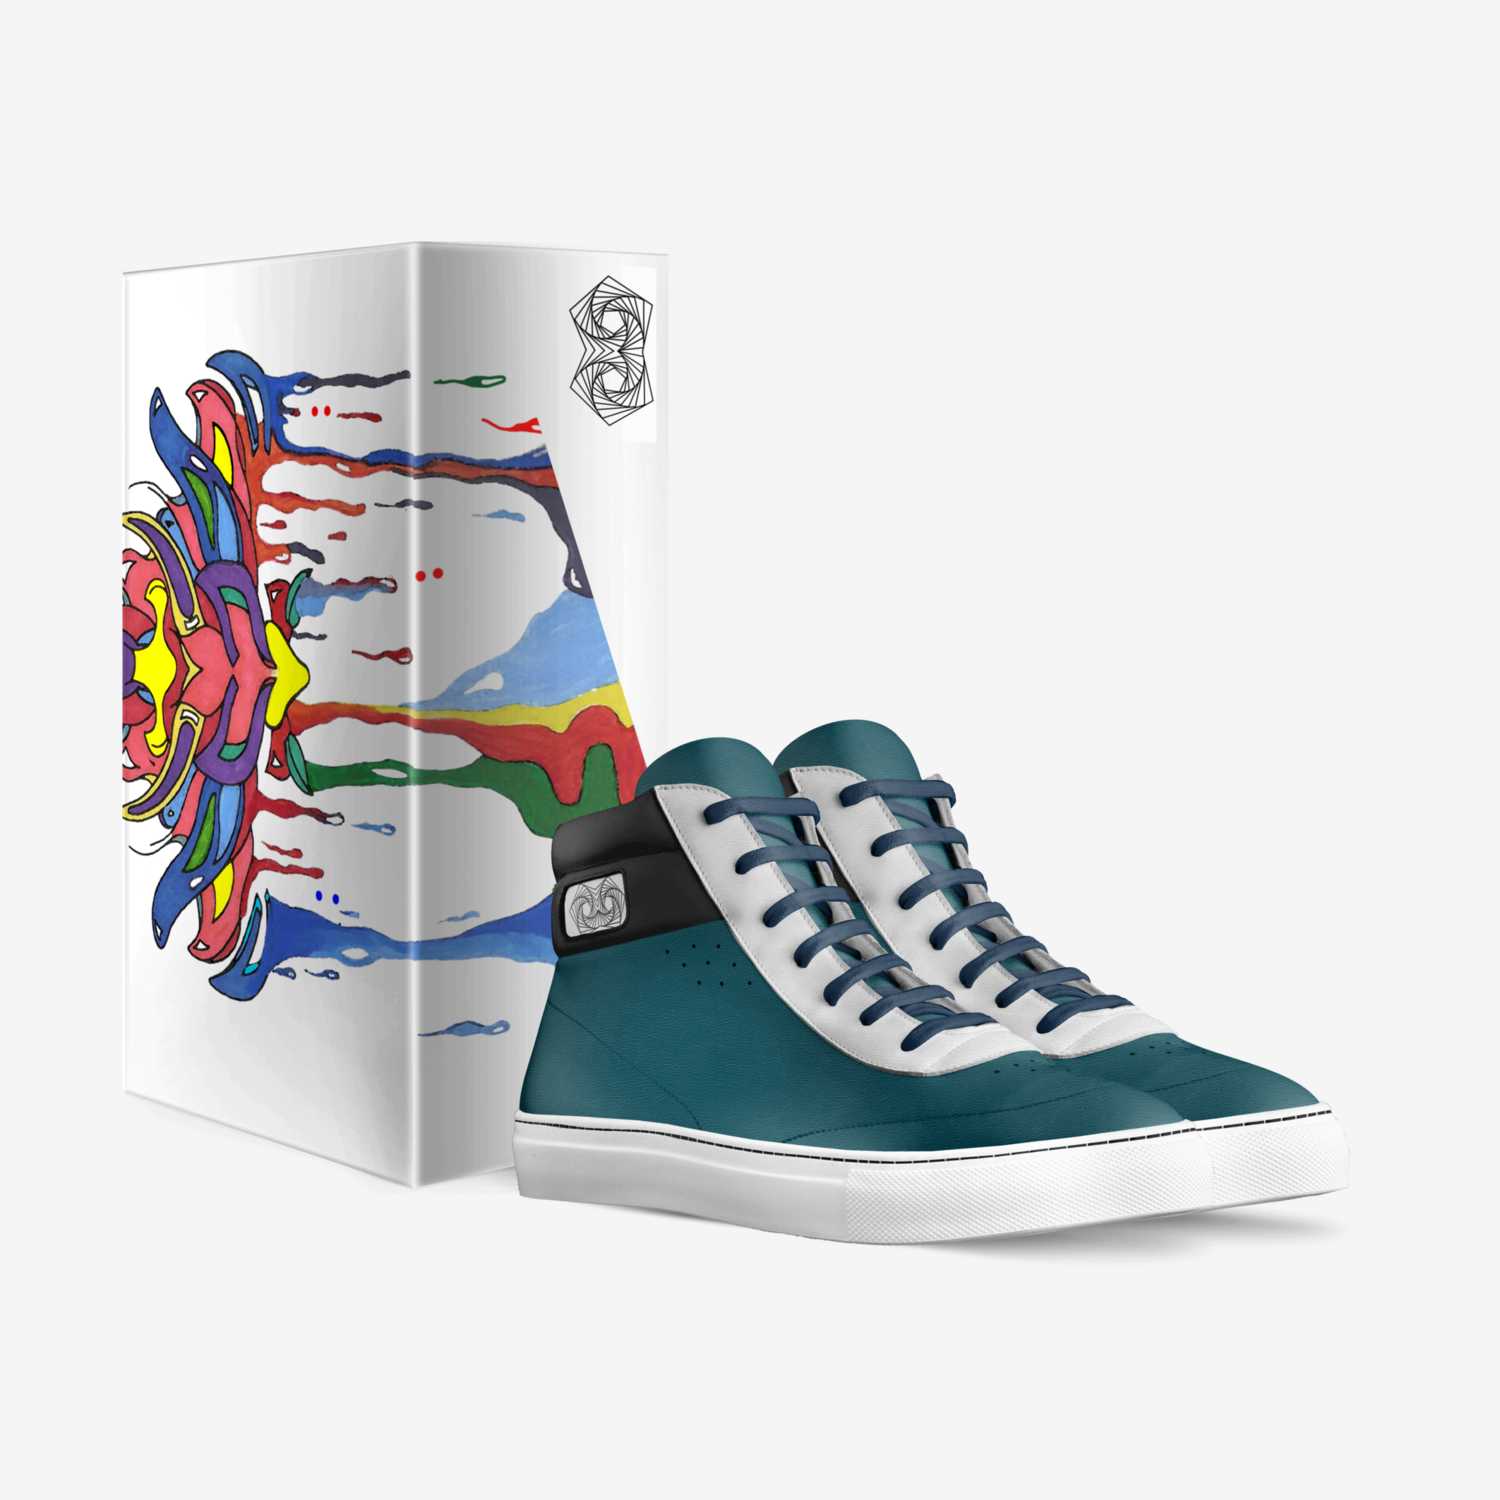 Gravitate custom made in Italy shoes by Dylan Trujillo | Box view